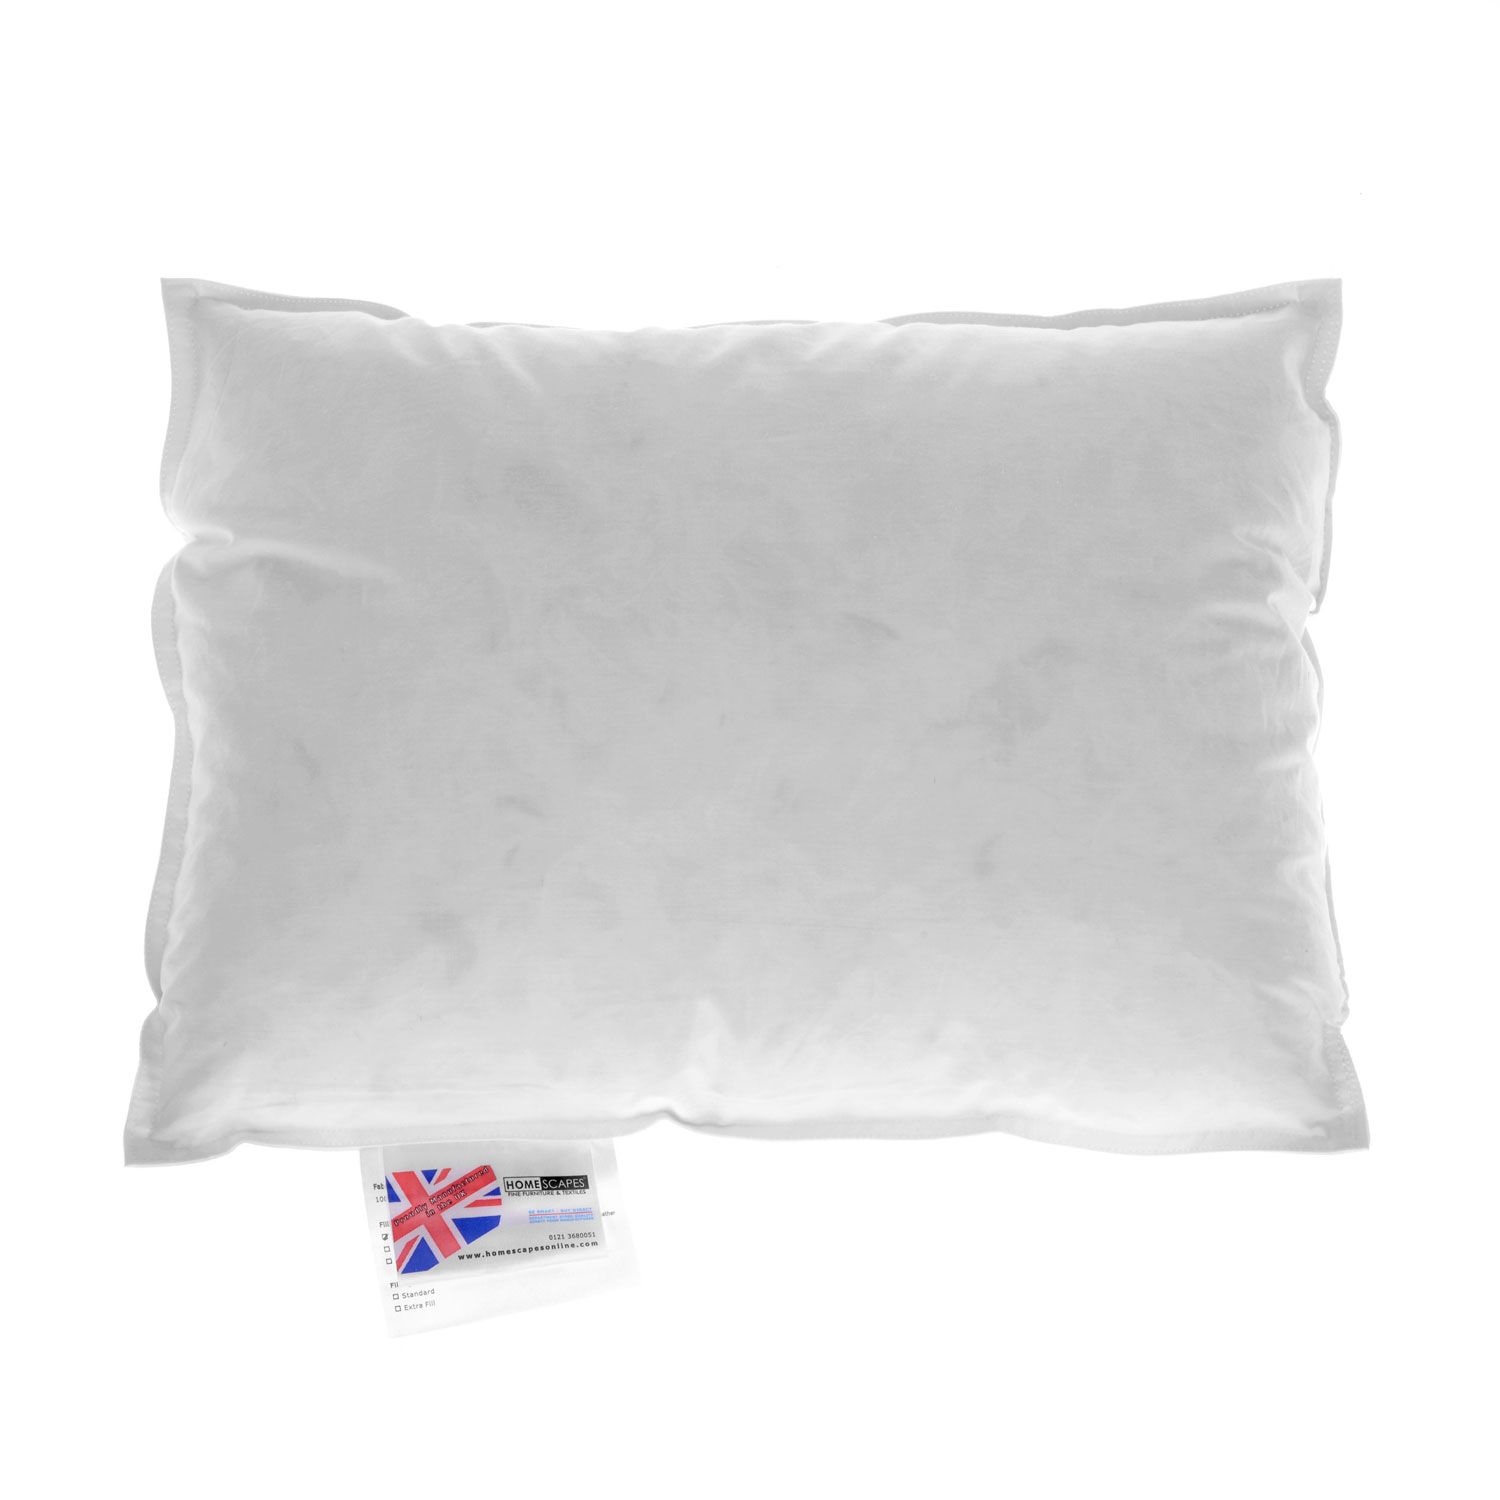 large big cushions ideal 40cm x 40cm 4 x cushion pad inner insert new white duck feather 100 natural down proof cotton cover 16x16 